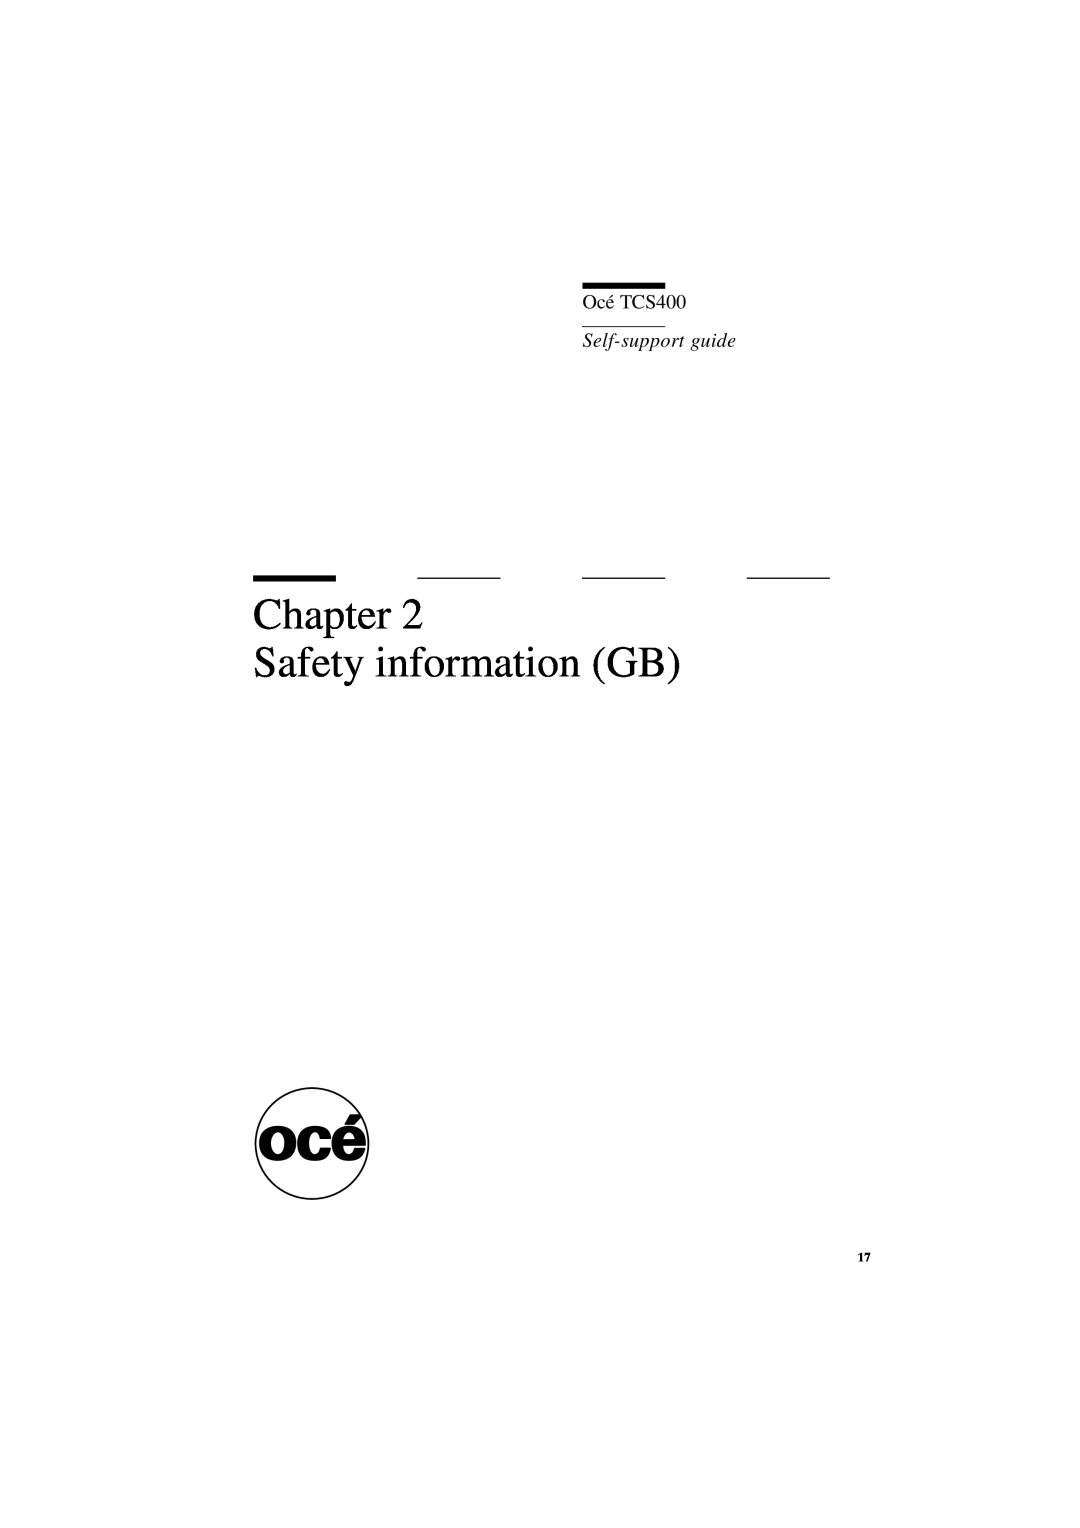 Oce North America manual Chapter Safety information GB, Océ TCS400, Self-support guide 